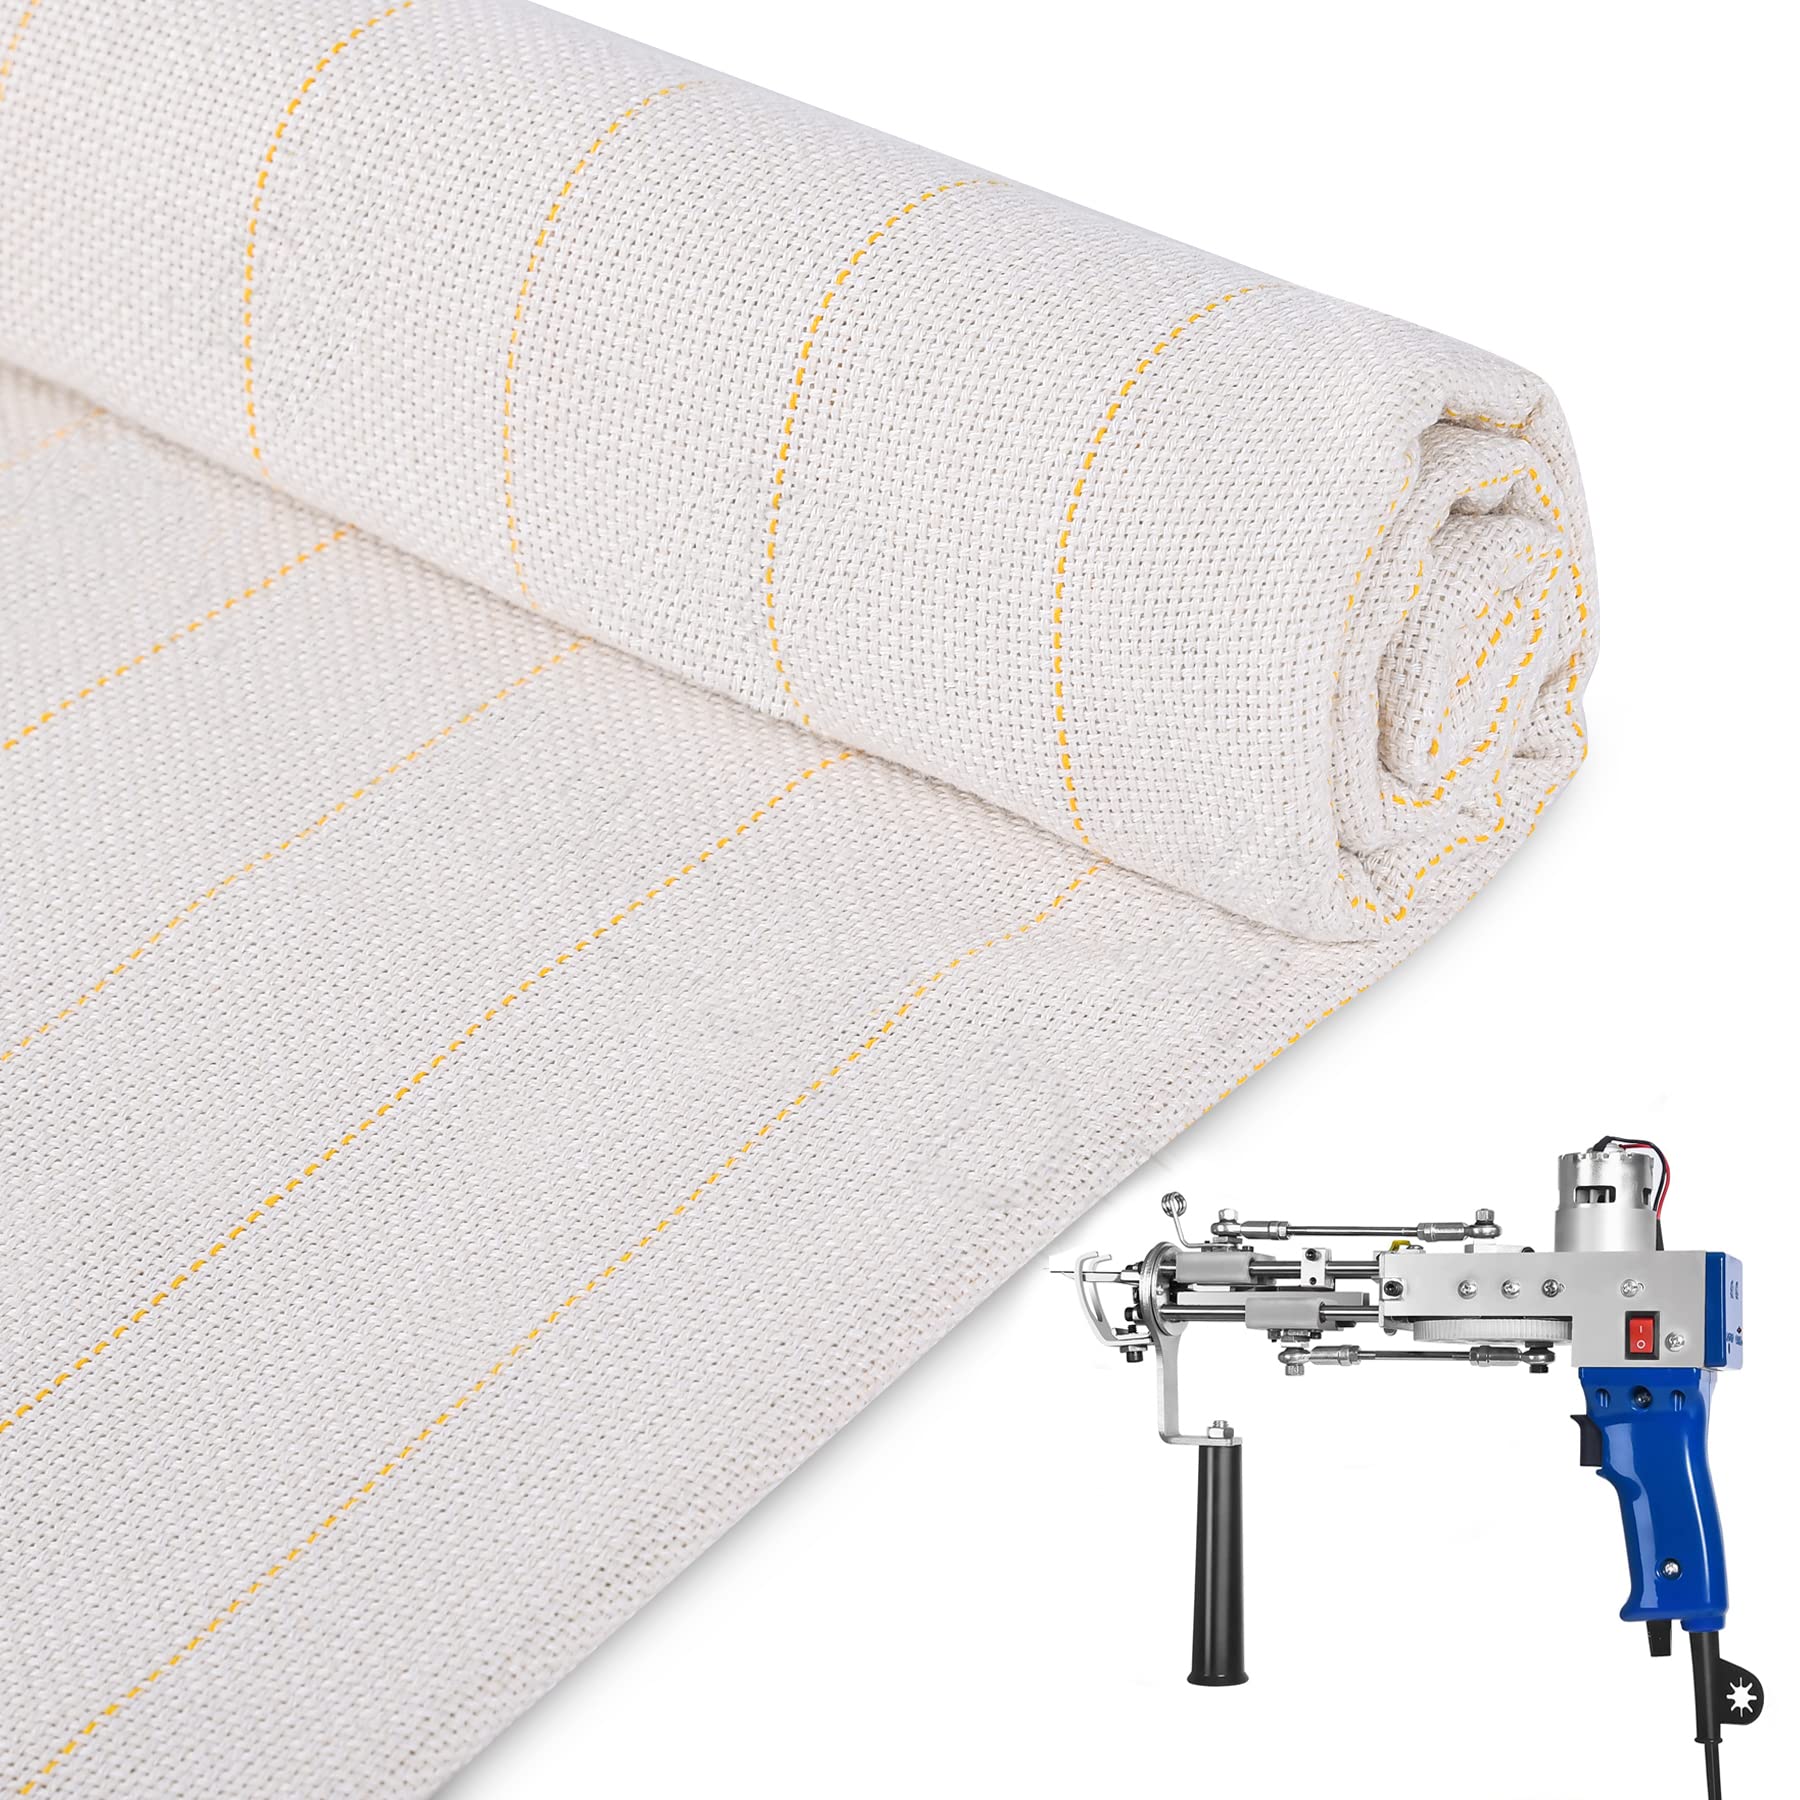 Primary Tufting Cloth with Marked Lines Rug Backing Fabric Monks Cloth for  Cut/Loop Pile Tufting Gun Punch Needle (82.7x78.7in) 82.7x78.7 IN